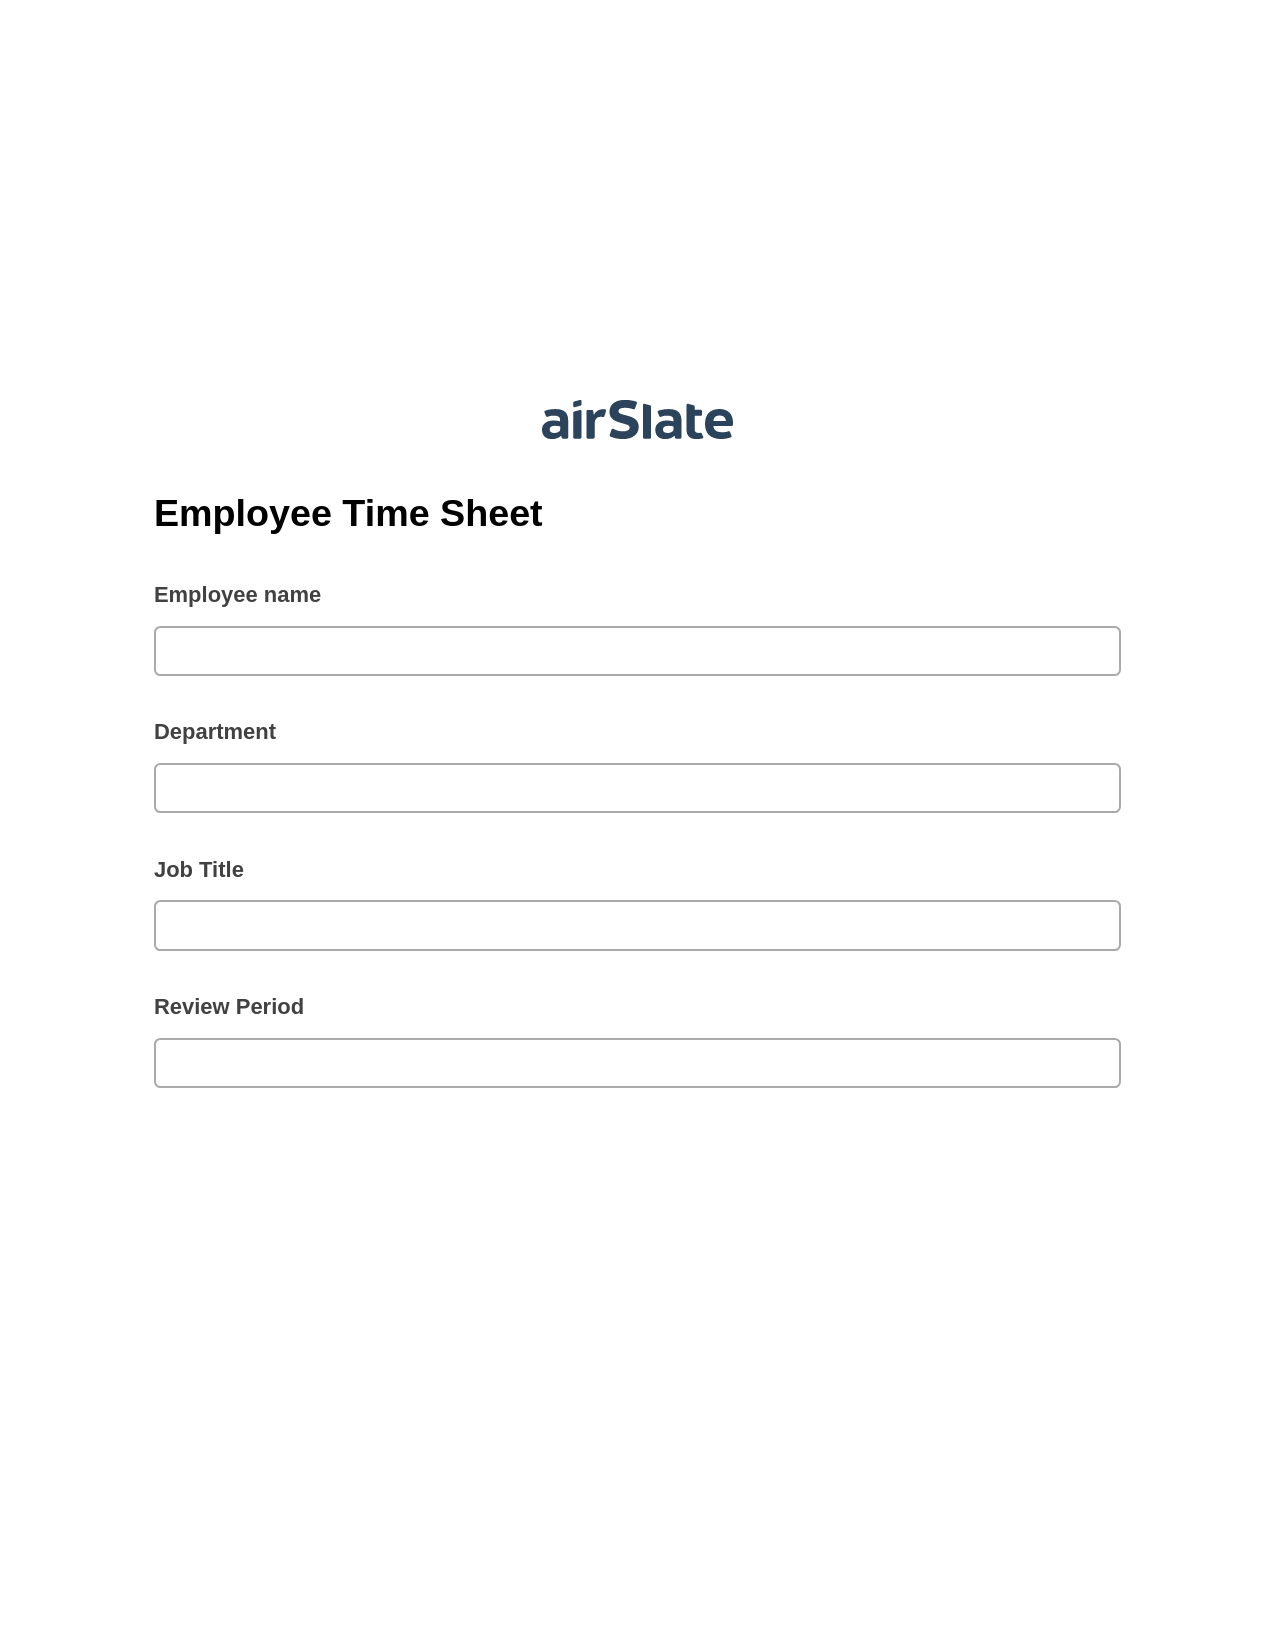 Employee Time Sheet Pre-fill Dropdowns from Google Sheet Bot, Update Audit Trail Bot, Archive to Dropbox Bot